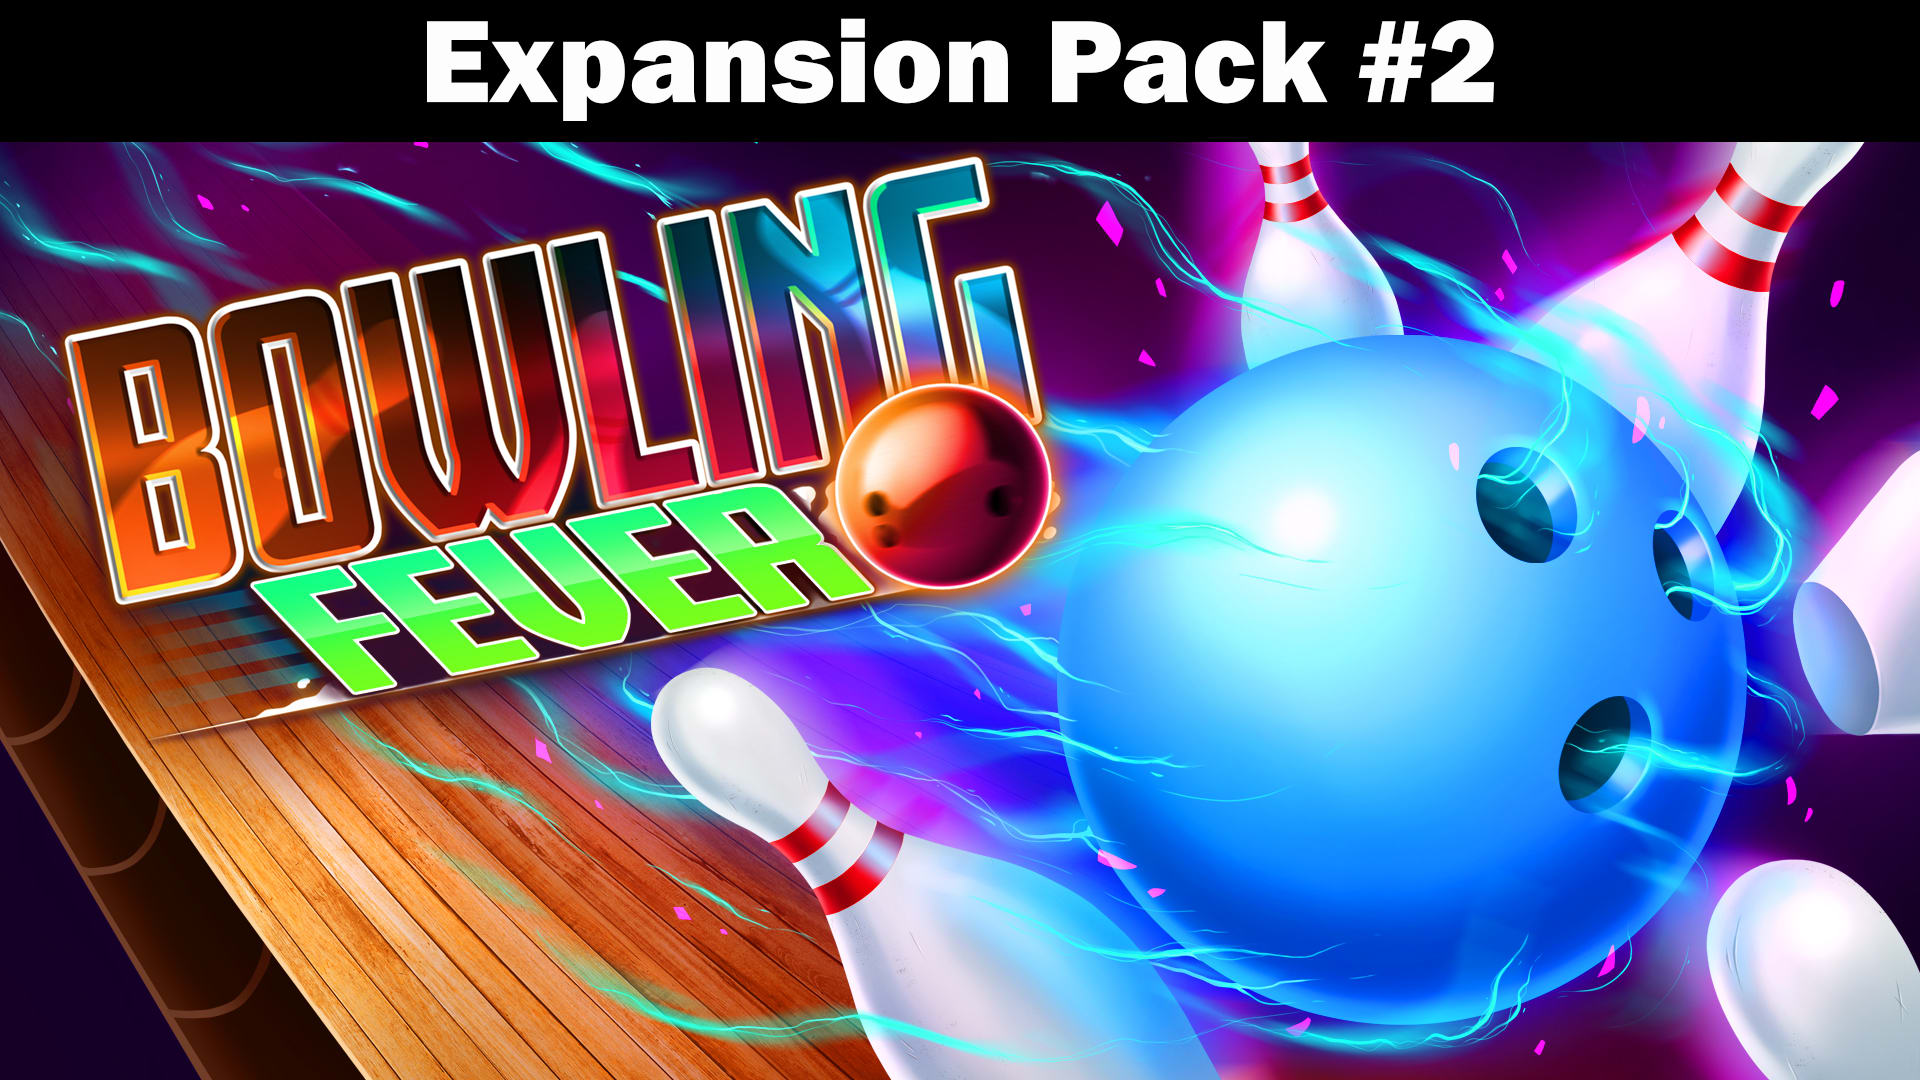 Bowling Fever Expansion Pack #2 1